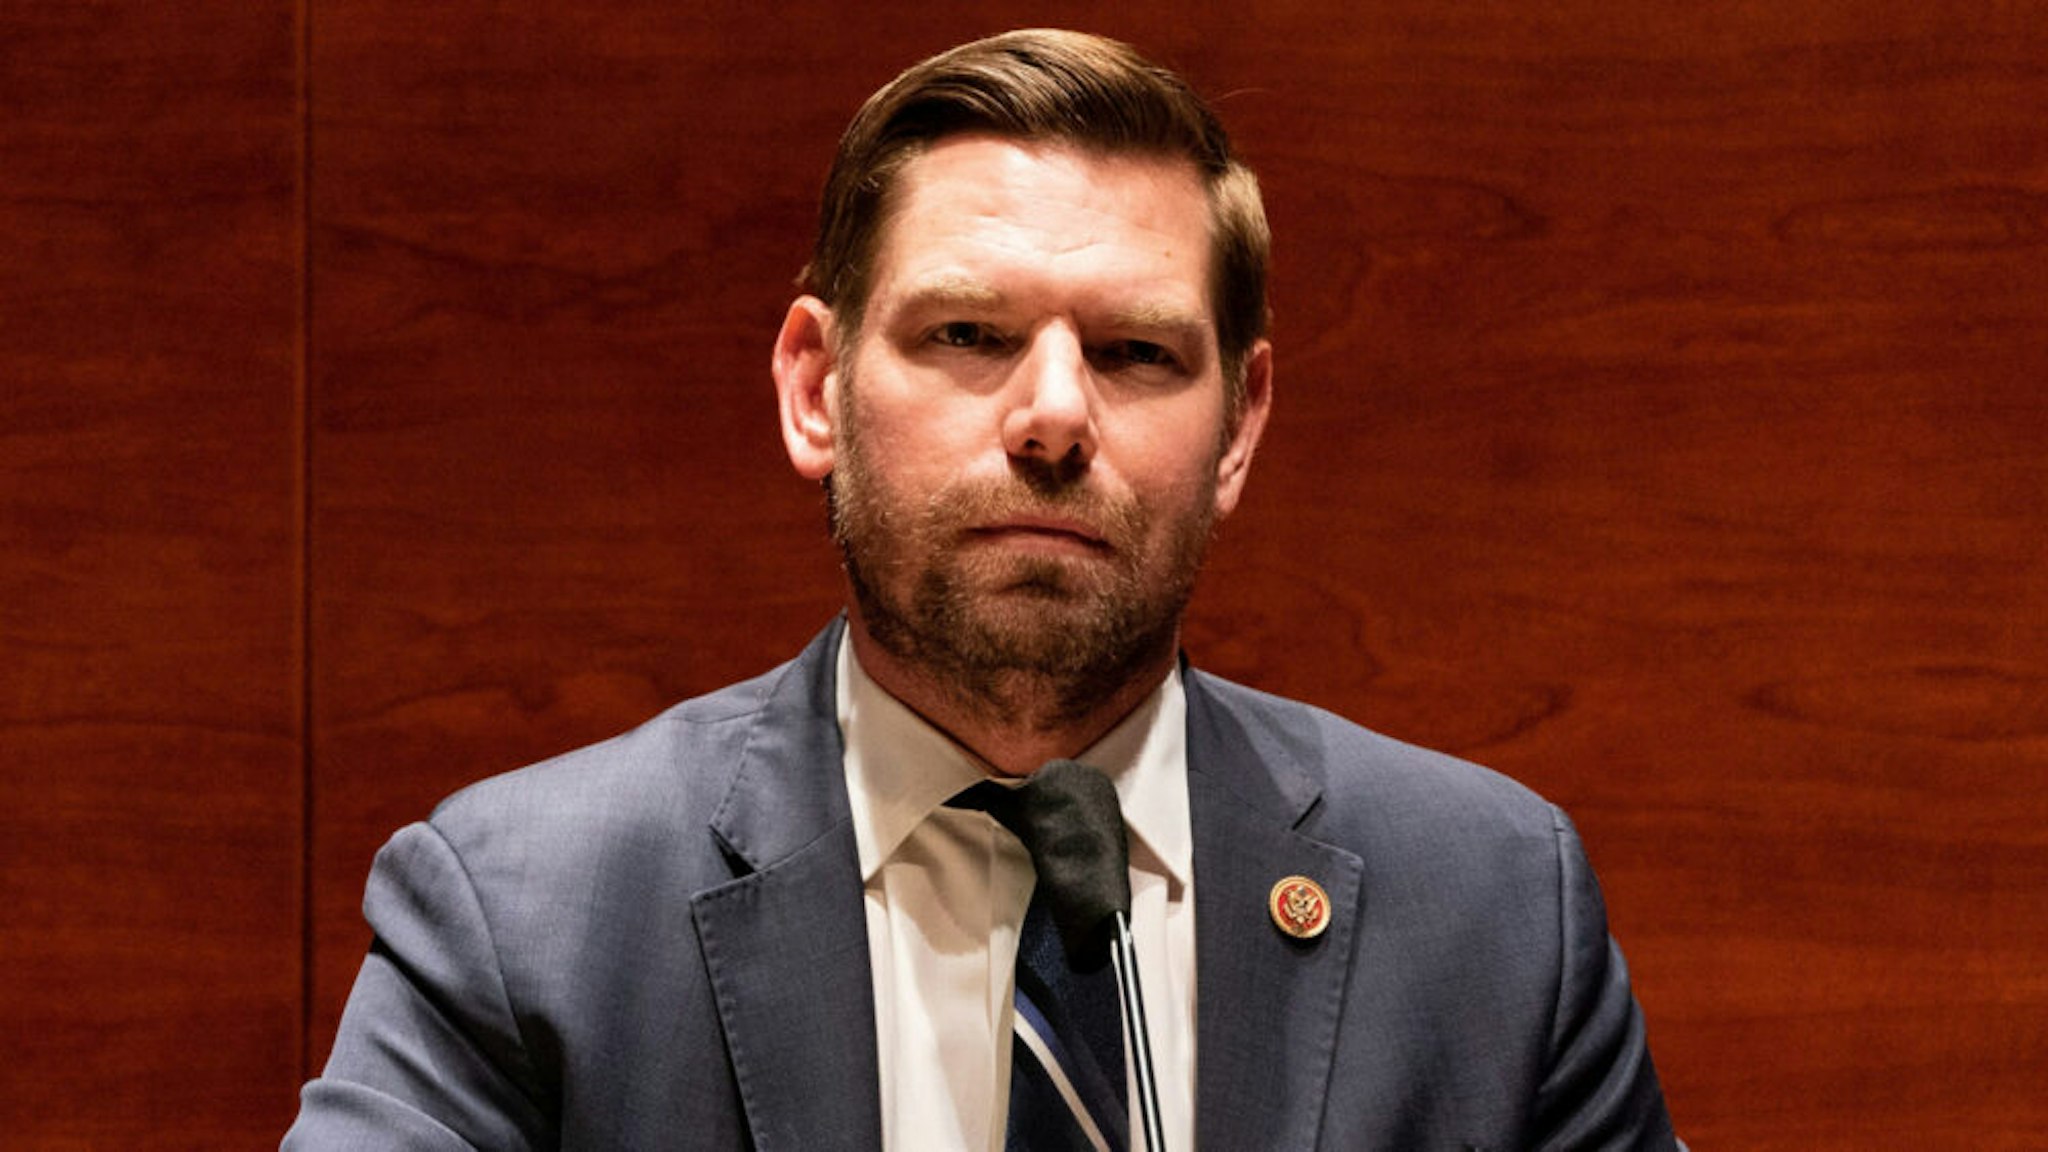 Rep. Eric Swalwell (D-CA) listens during the House Judiciary committee hearing on "Oversight of the Department of Justice: Political Interference and Threats to Prosecutorial Independence", on Capitol Hill on June 24, 2020 in Washington DC.